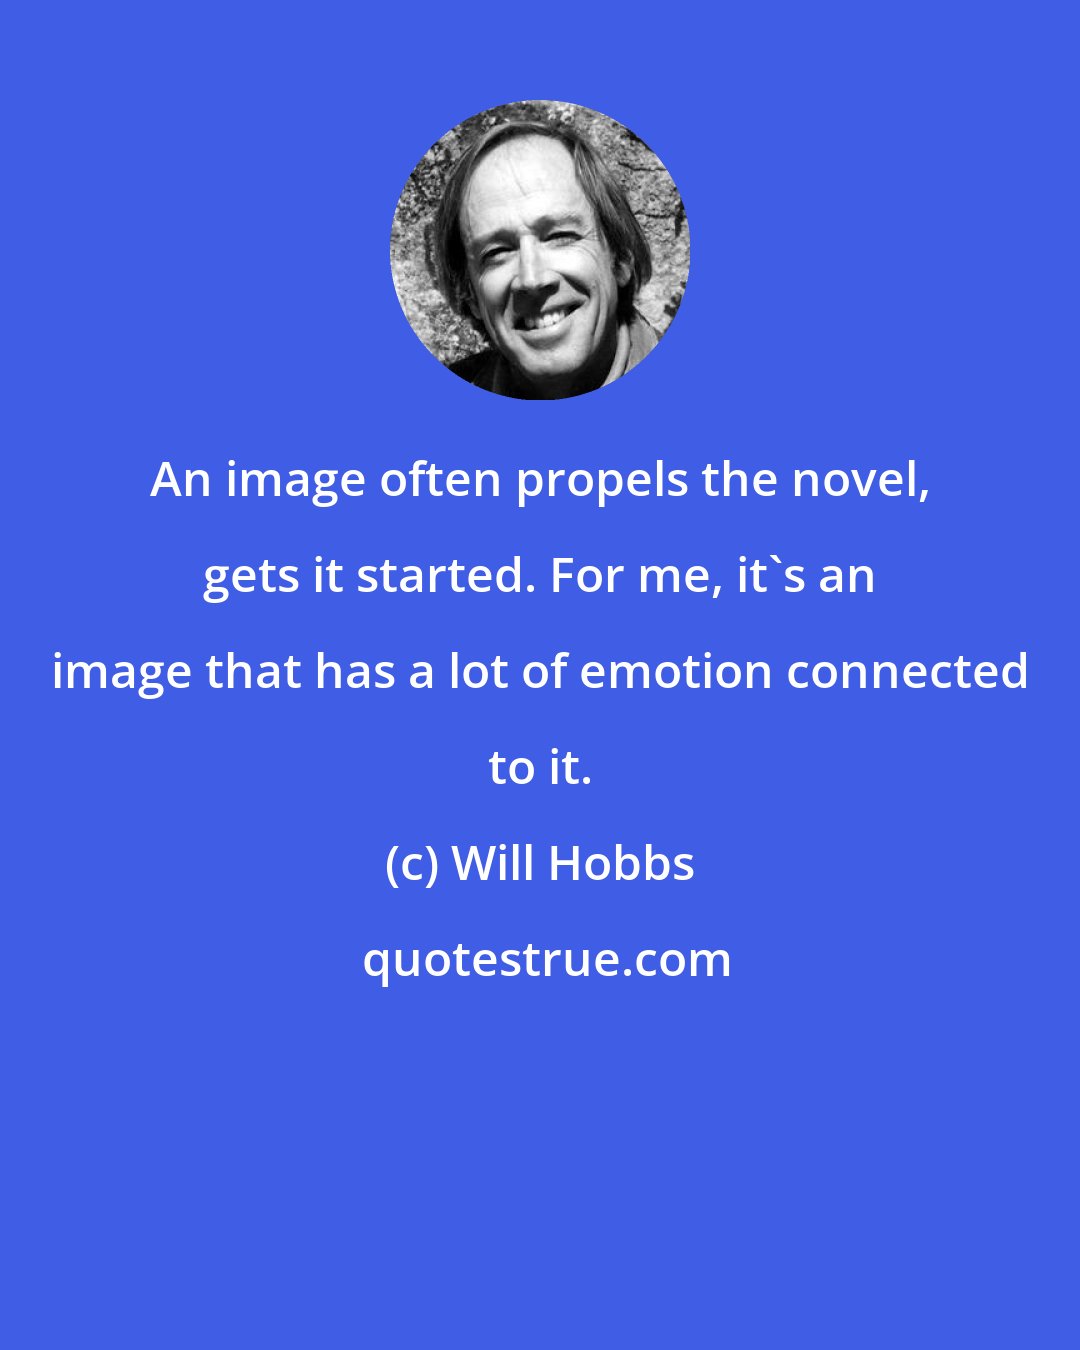 Will Hobbs: An image often propels the novel, gets it started. For me, it's an image that has a lot of emotion connected to it.